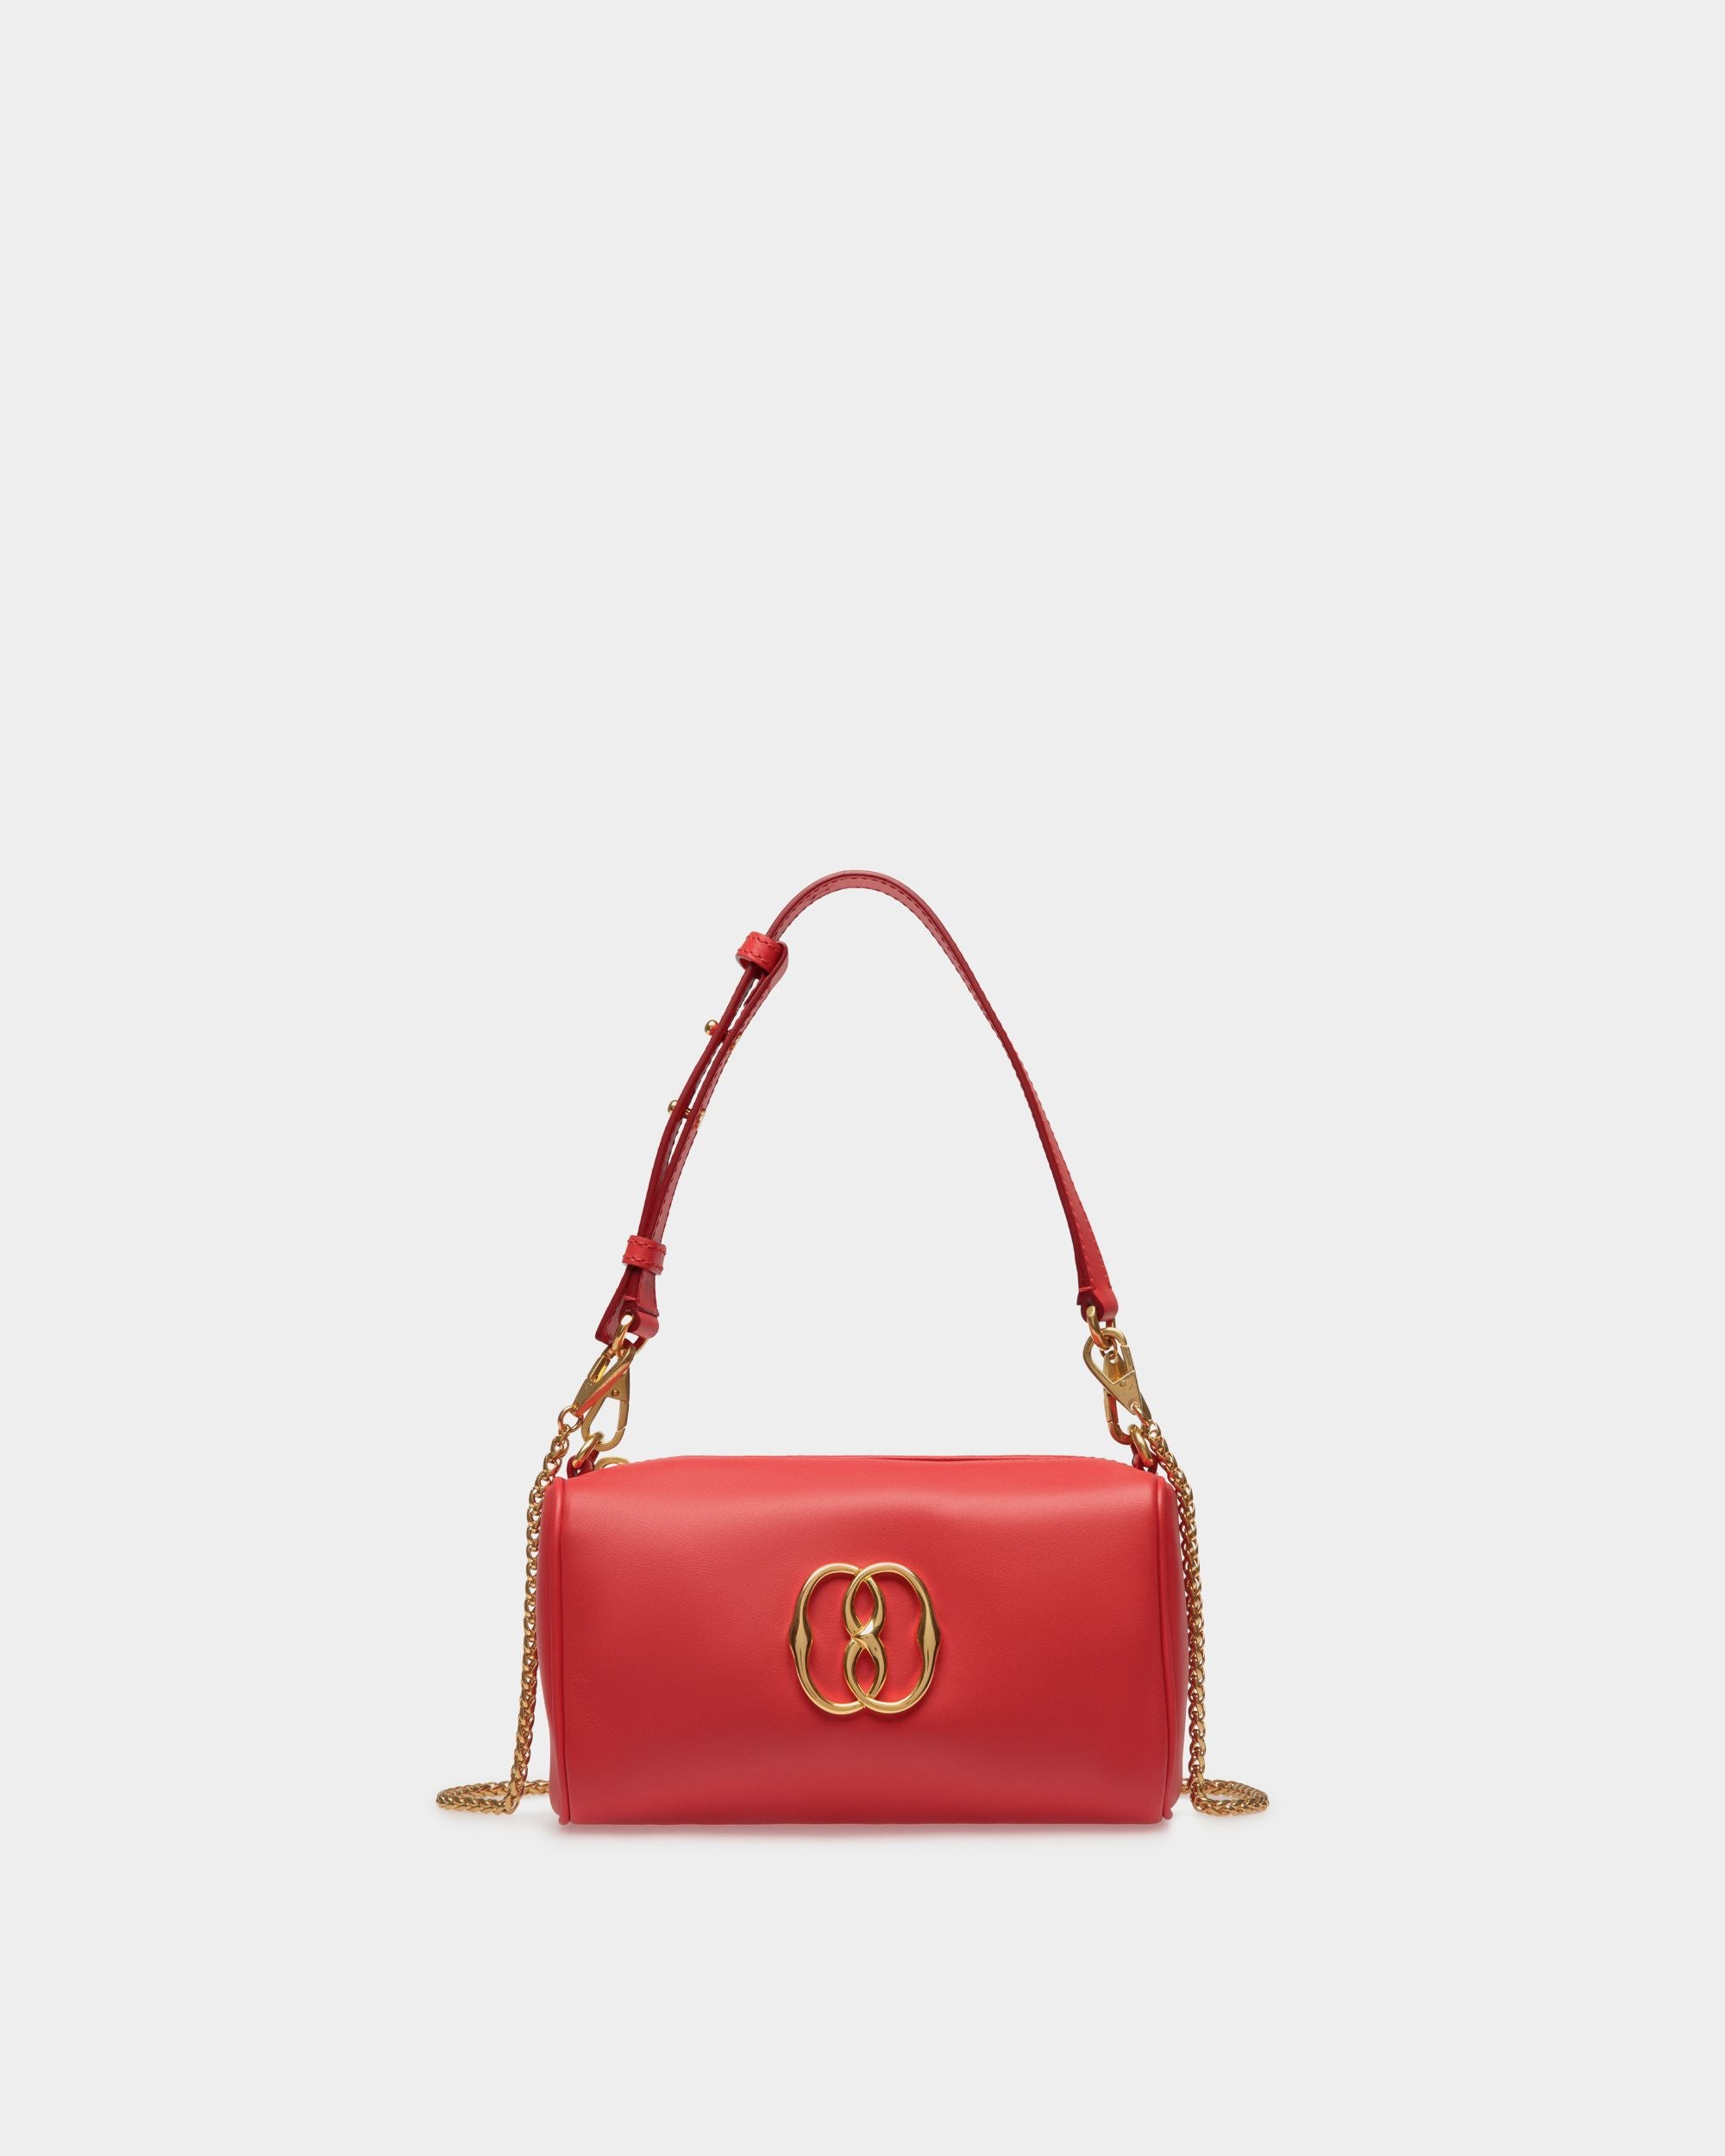 Emblem | Women's Mini Bag in Red Leather | Bally | Still Life Front